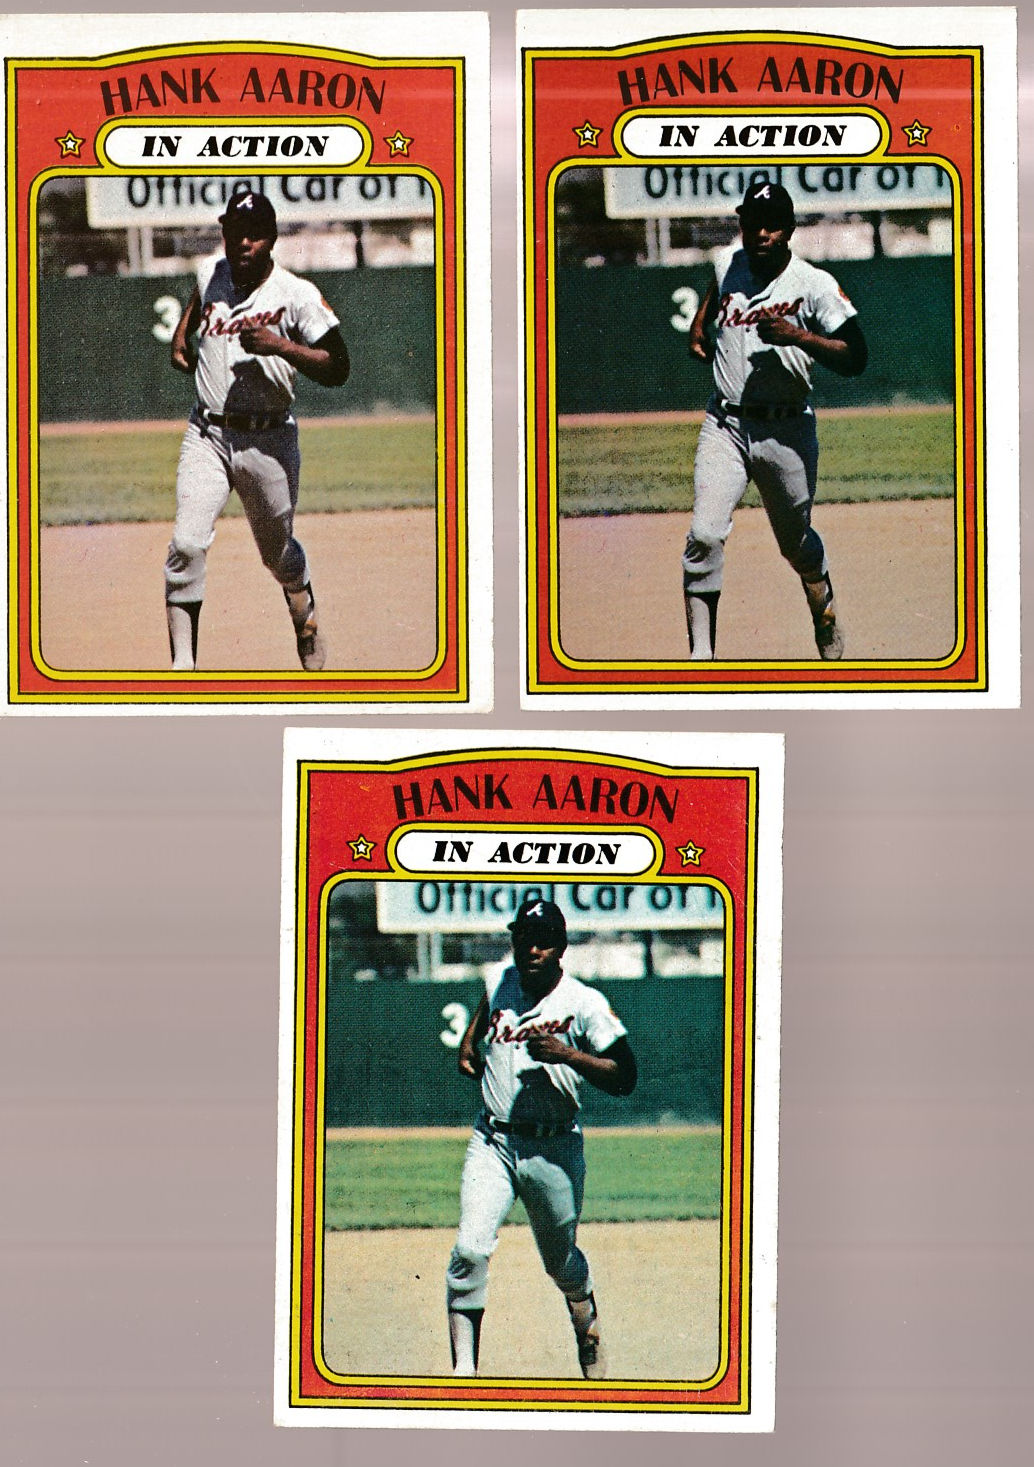 1972 Topps #300 Hank Aaron In-Action (Braves) Baseball cards value